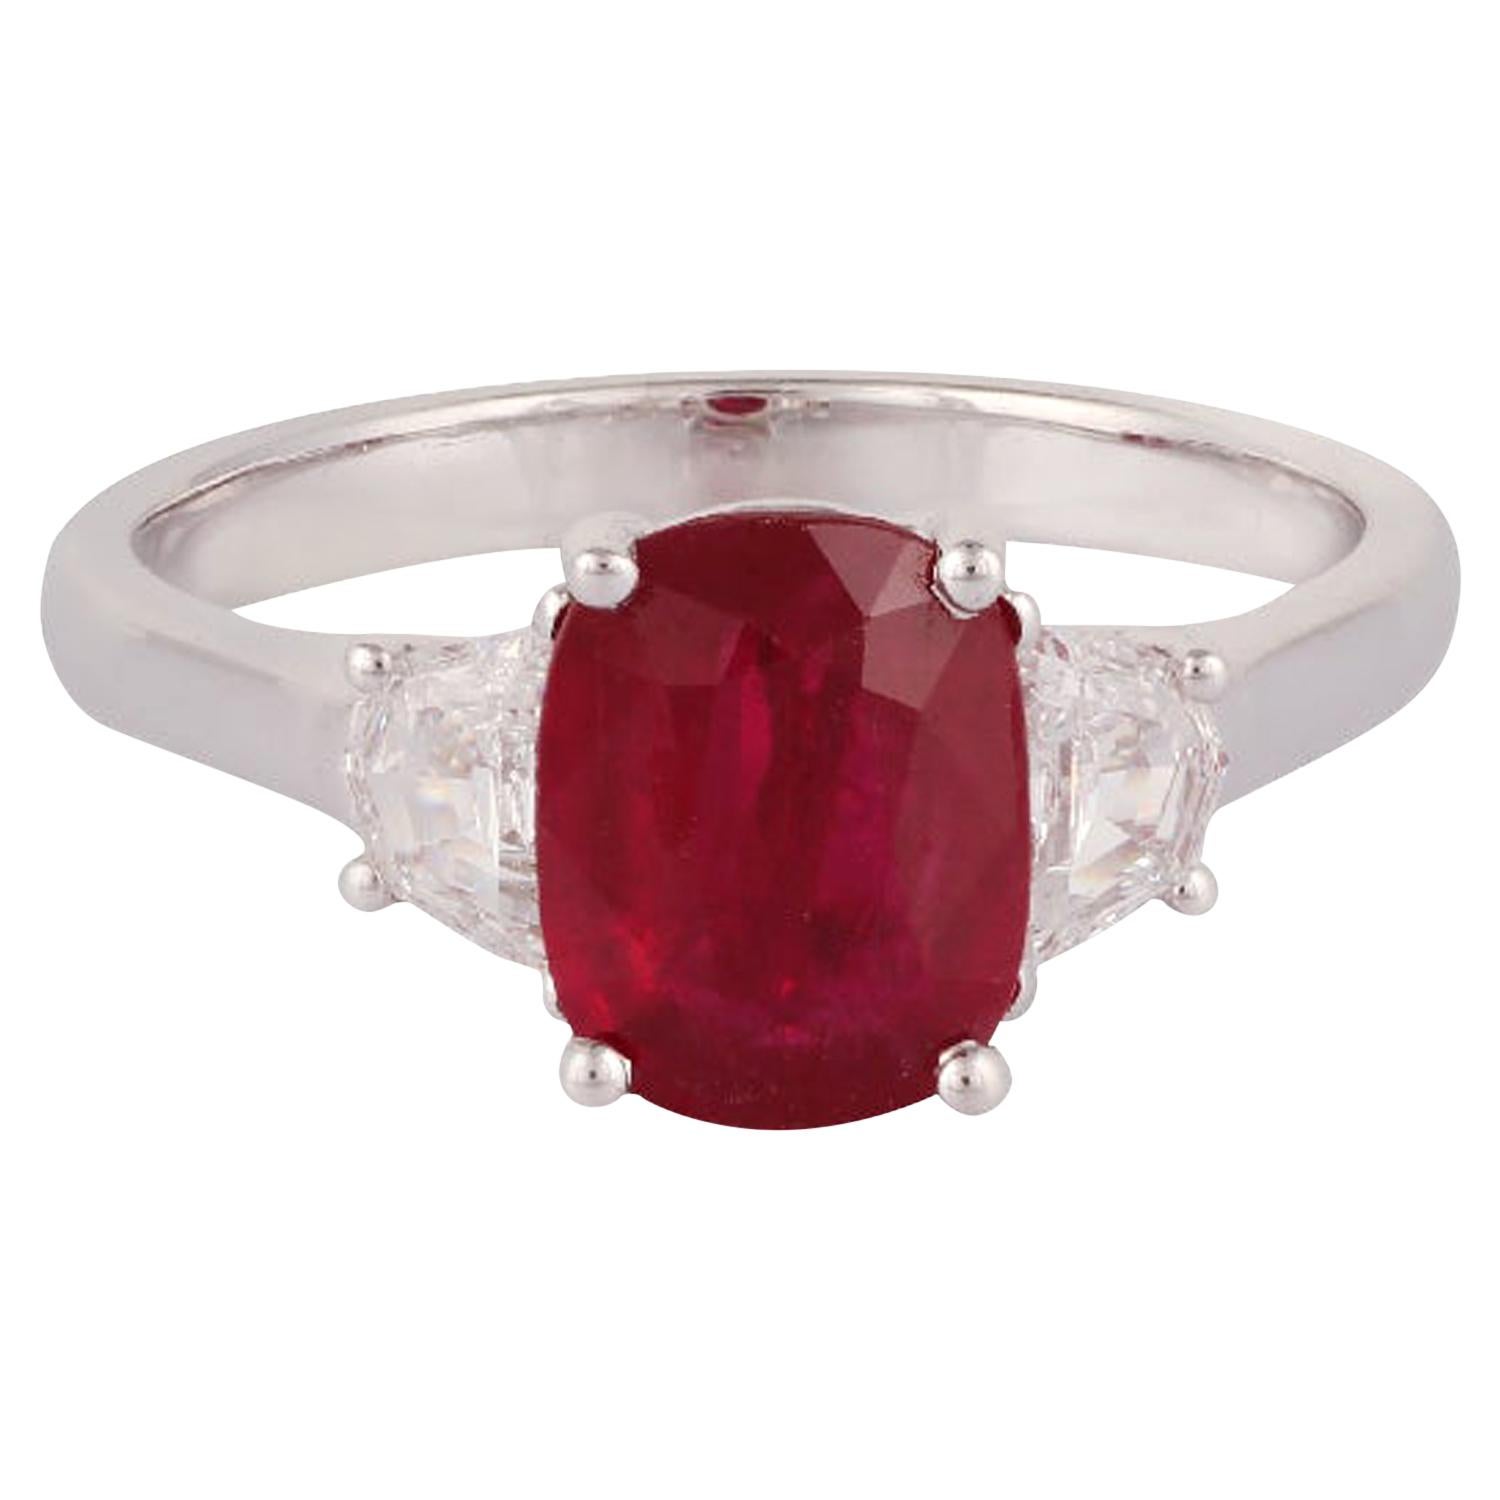 2.21 Carat Mozambique Ruby and Diamond Ring Studded in 18 Karat White Gold For Sale